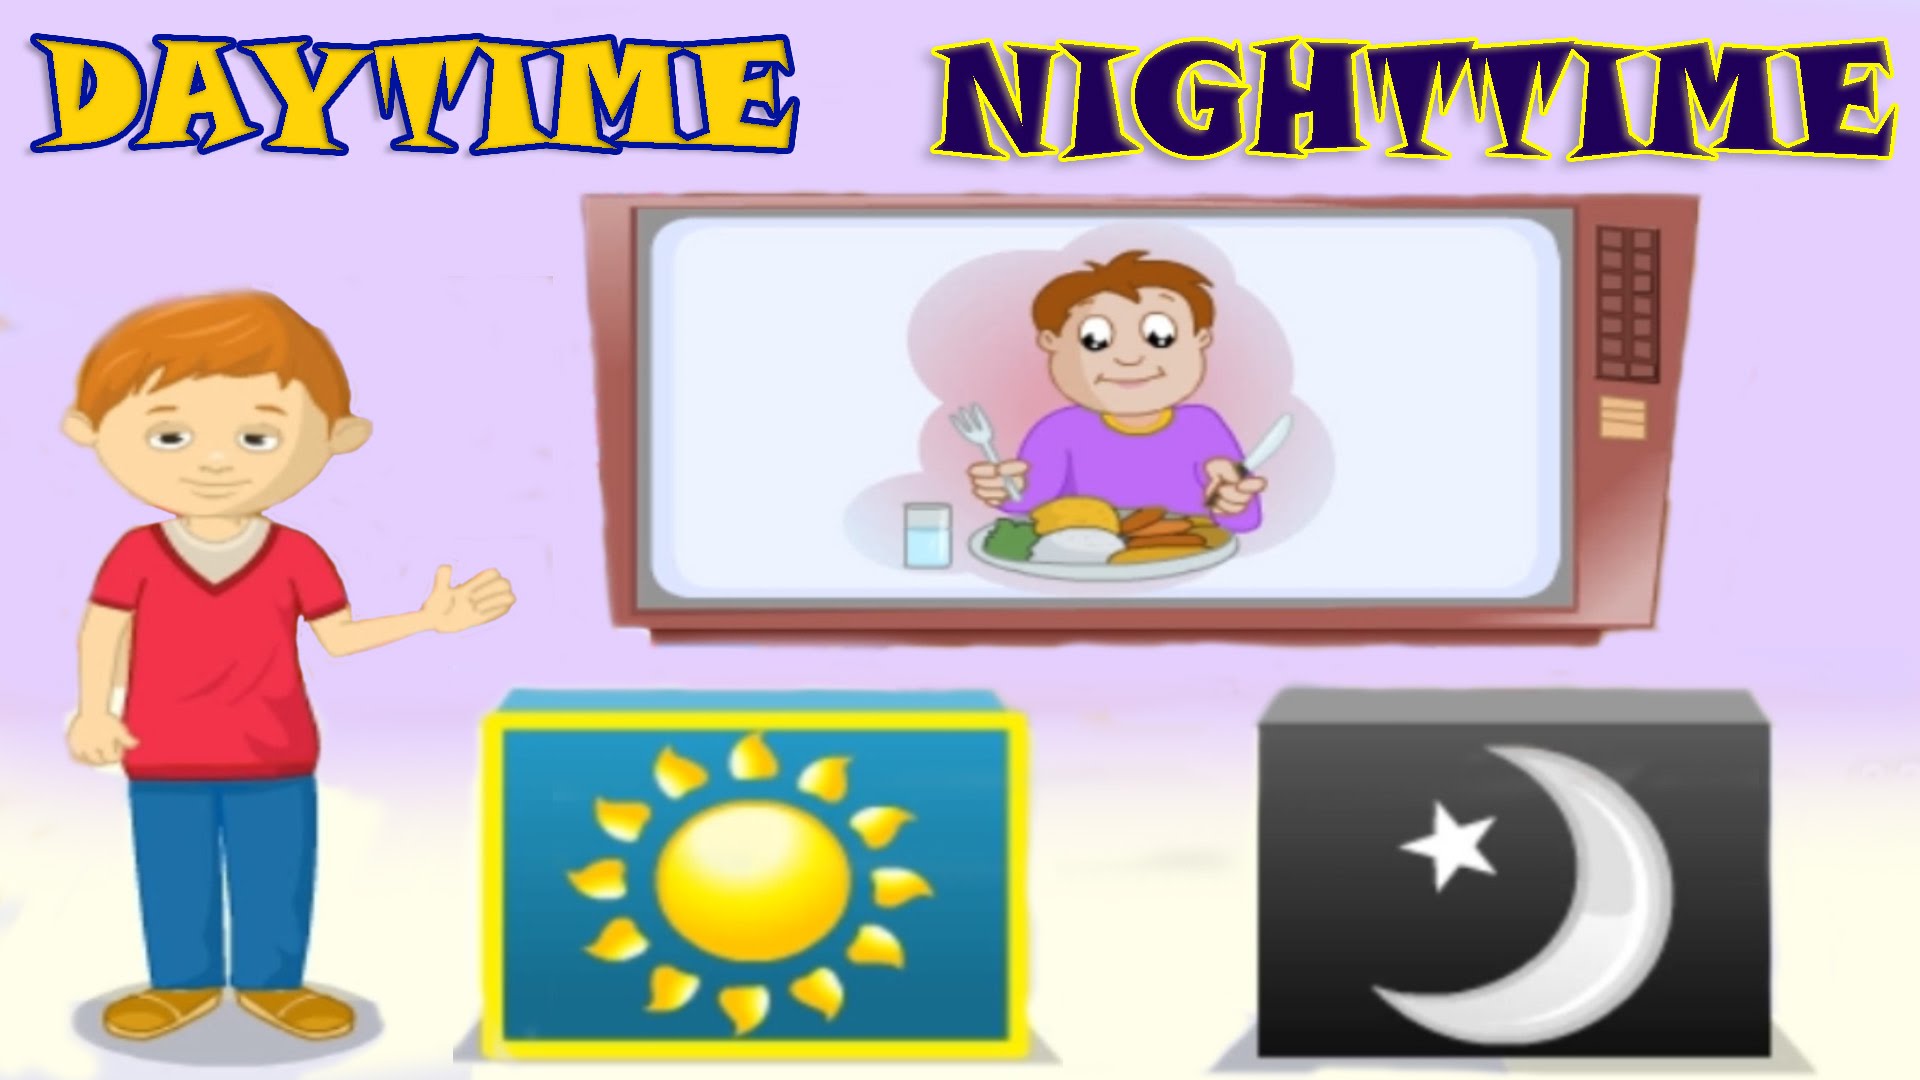 Daytime nighttime sequence of. Bedtime clipart night time activity